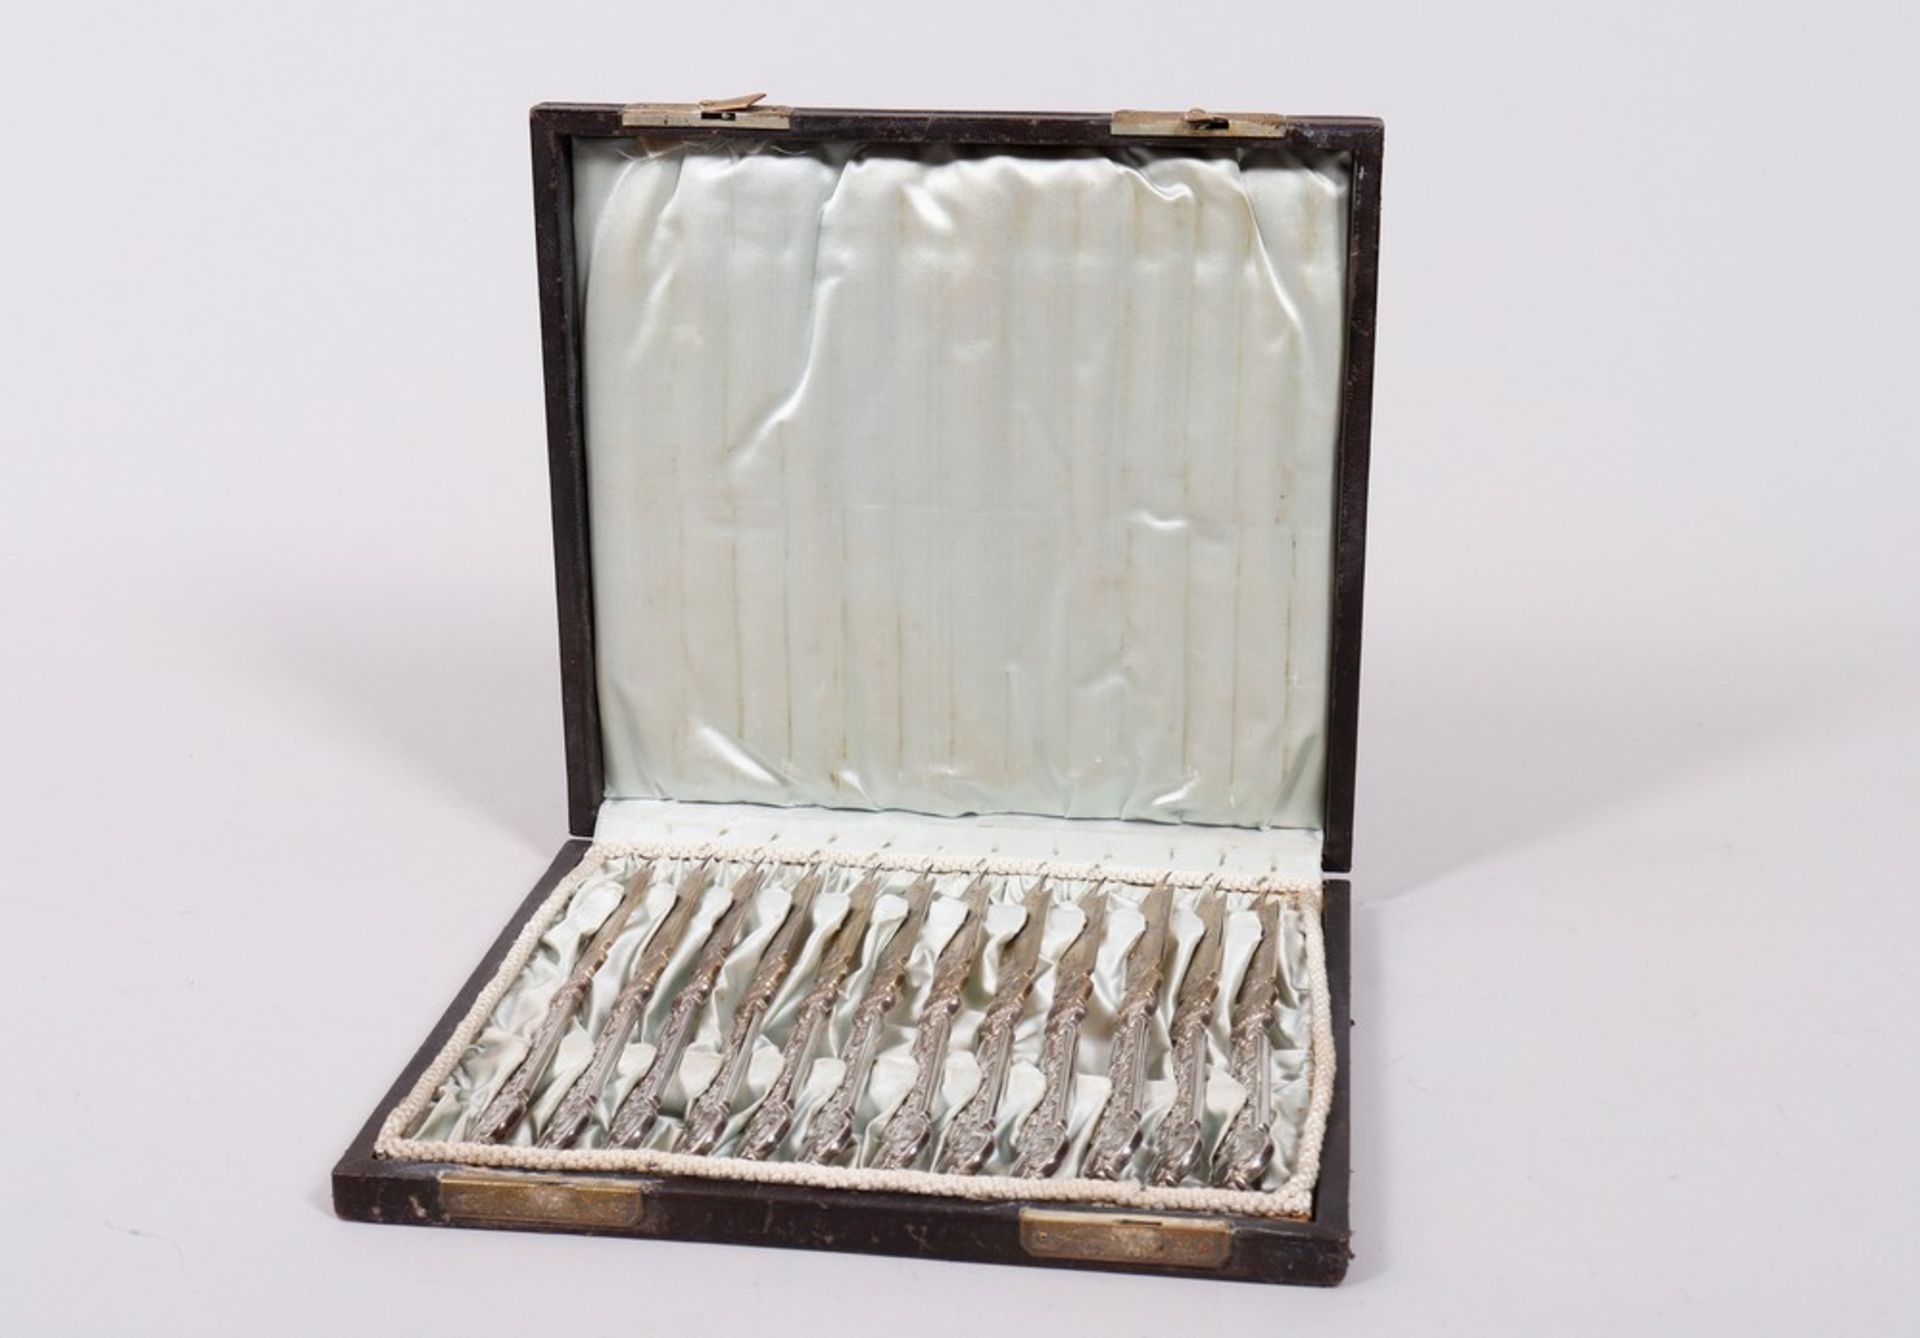 12 Historicism fruit knives in case, 750 silver, partially gilt, probably German, late 19th C. - Image 7 of 7